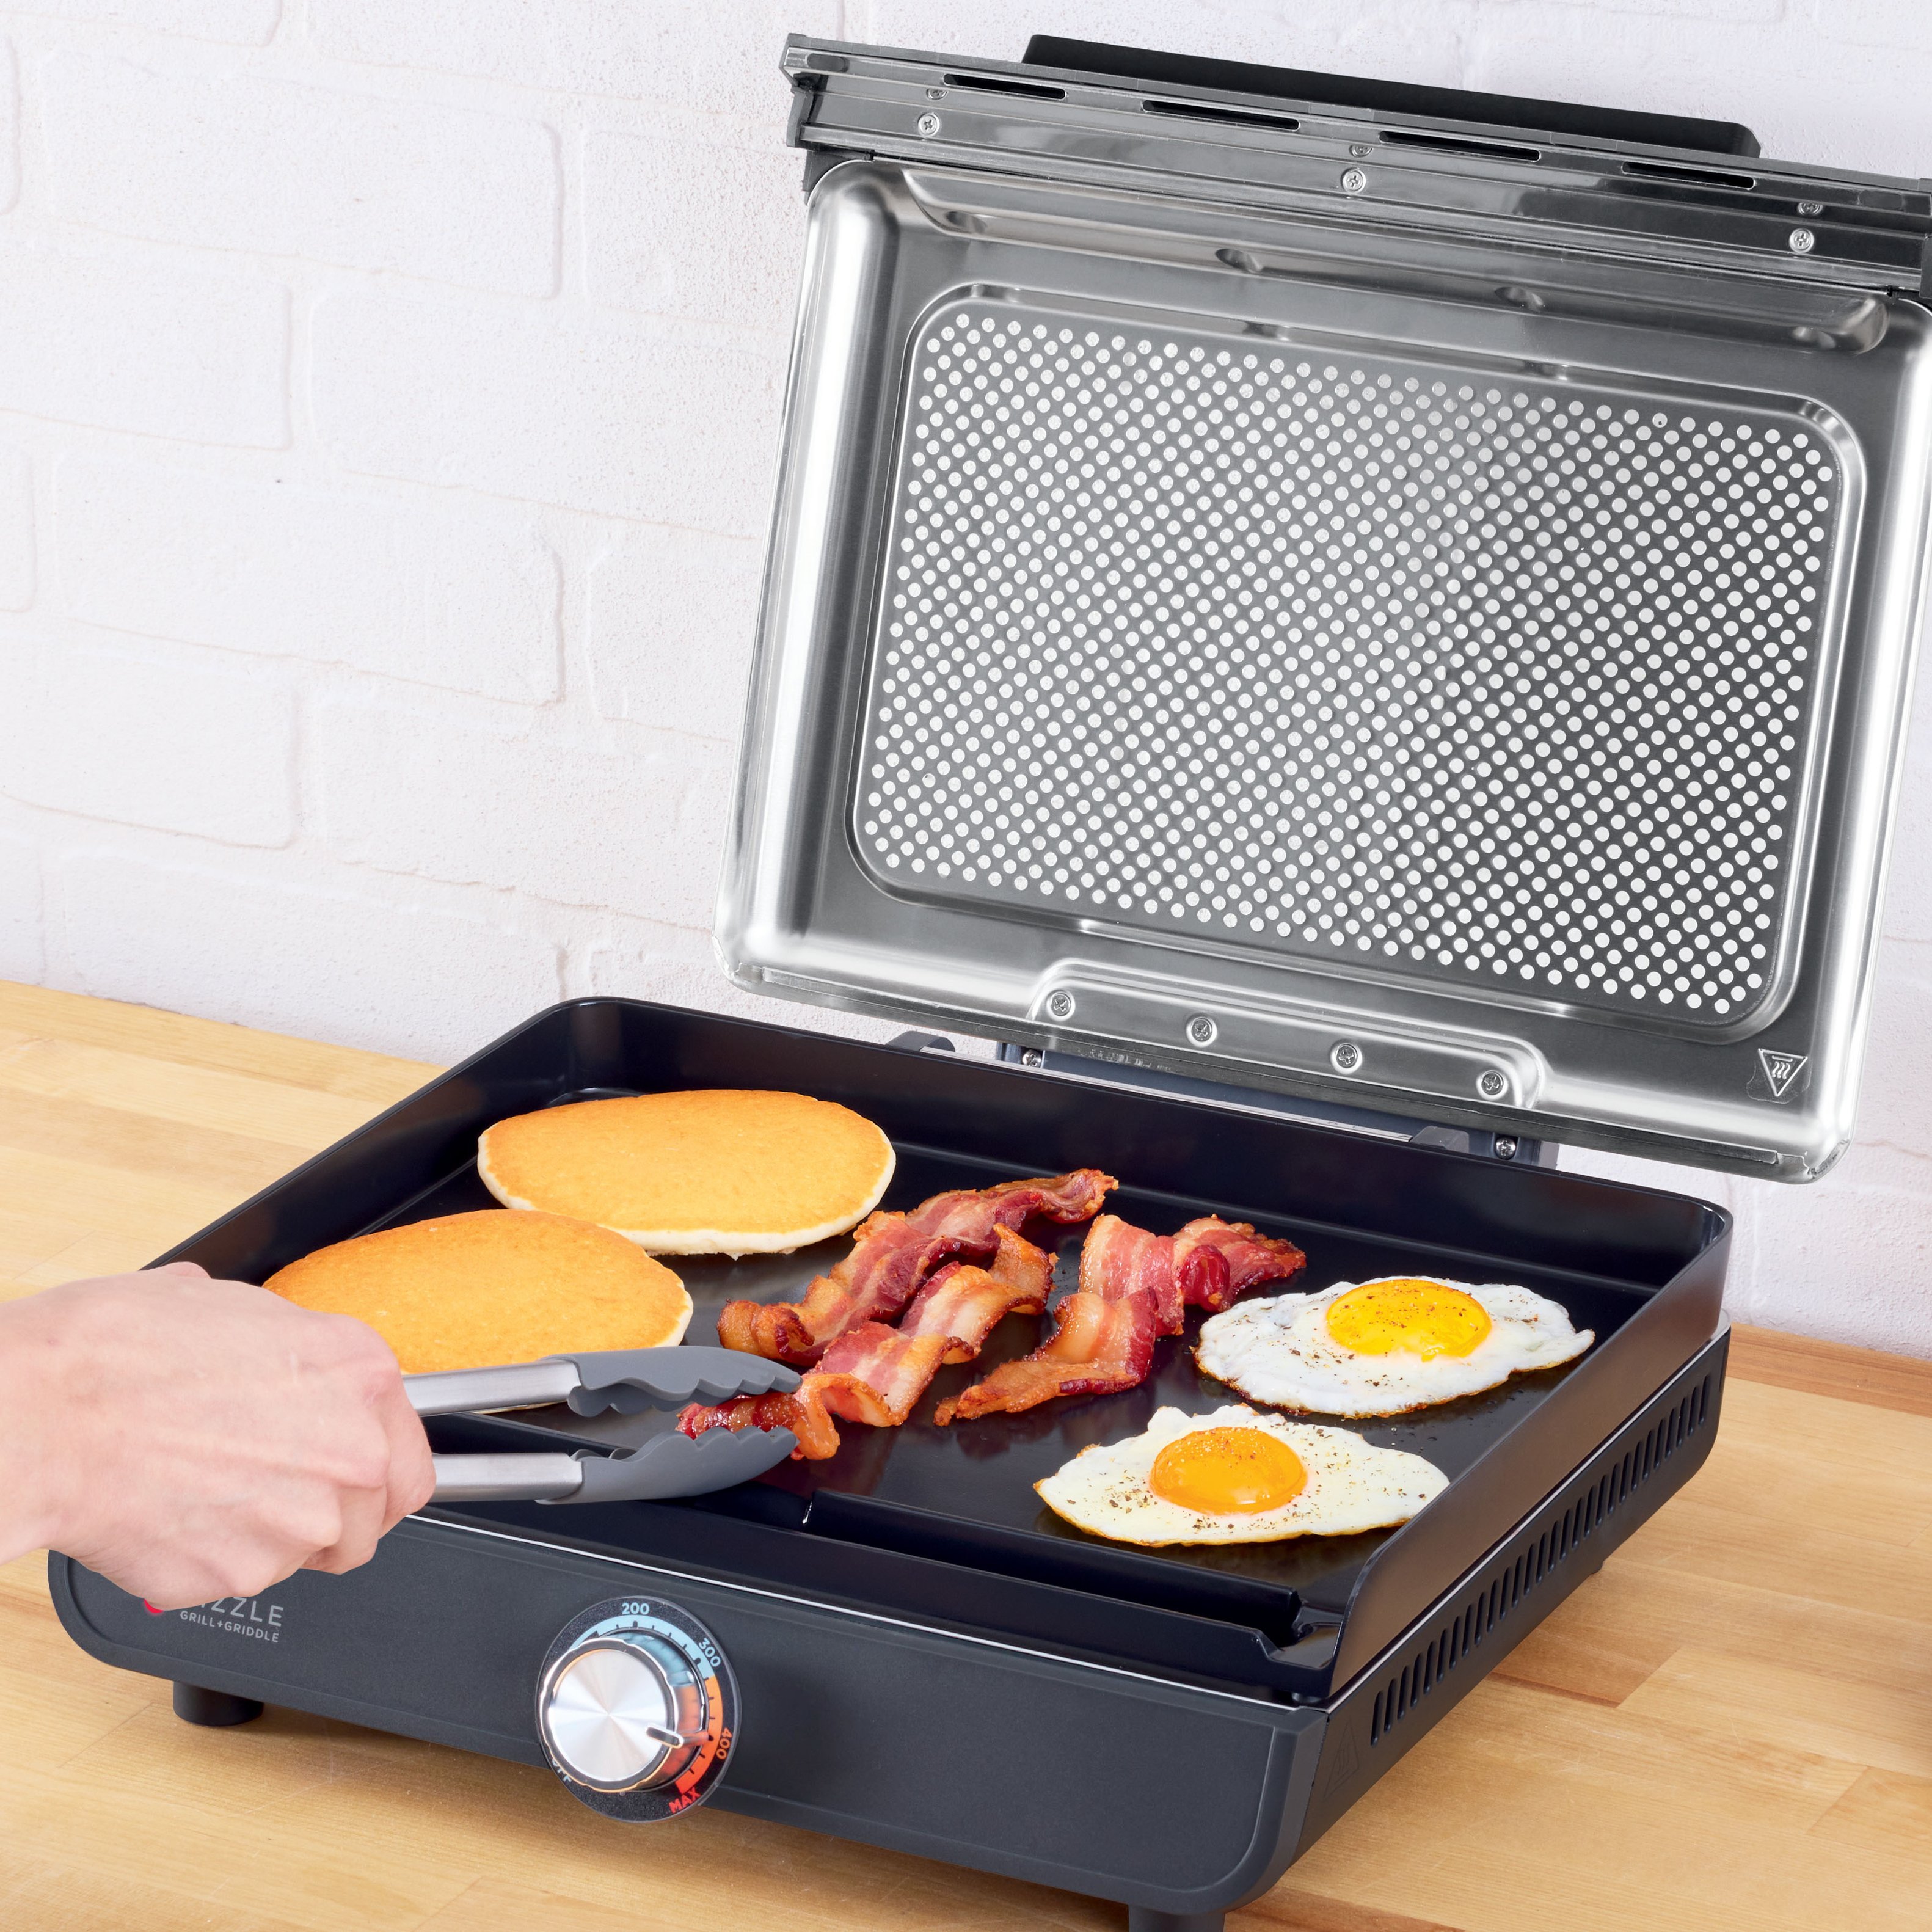 Ninja Sizzle Smokeless Indoor Grill and Griddle with Rec 